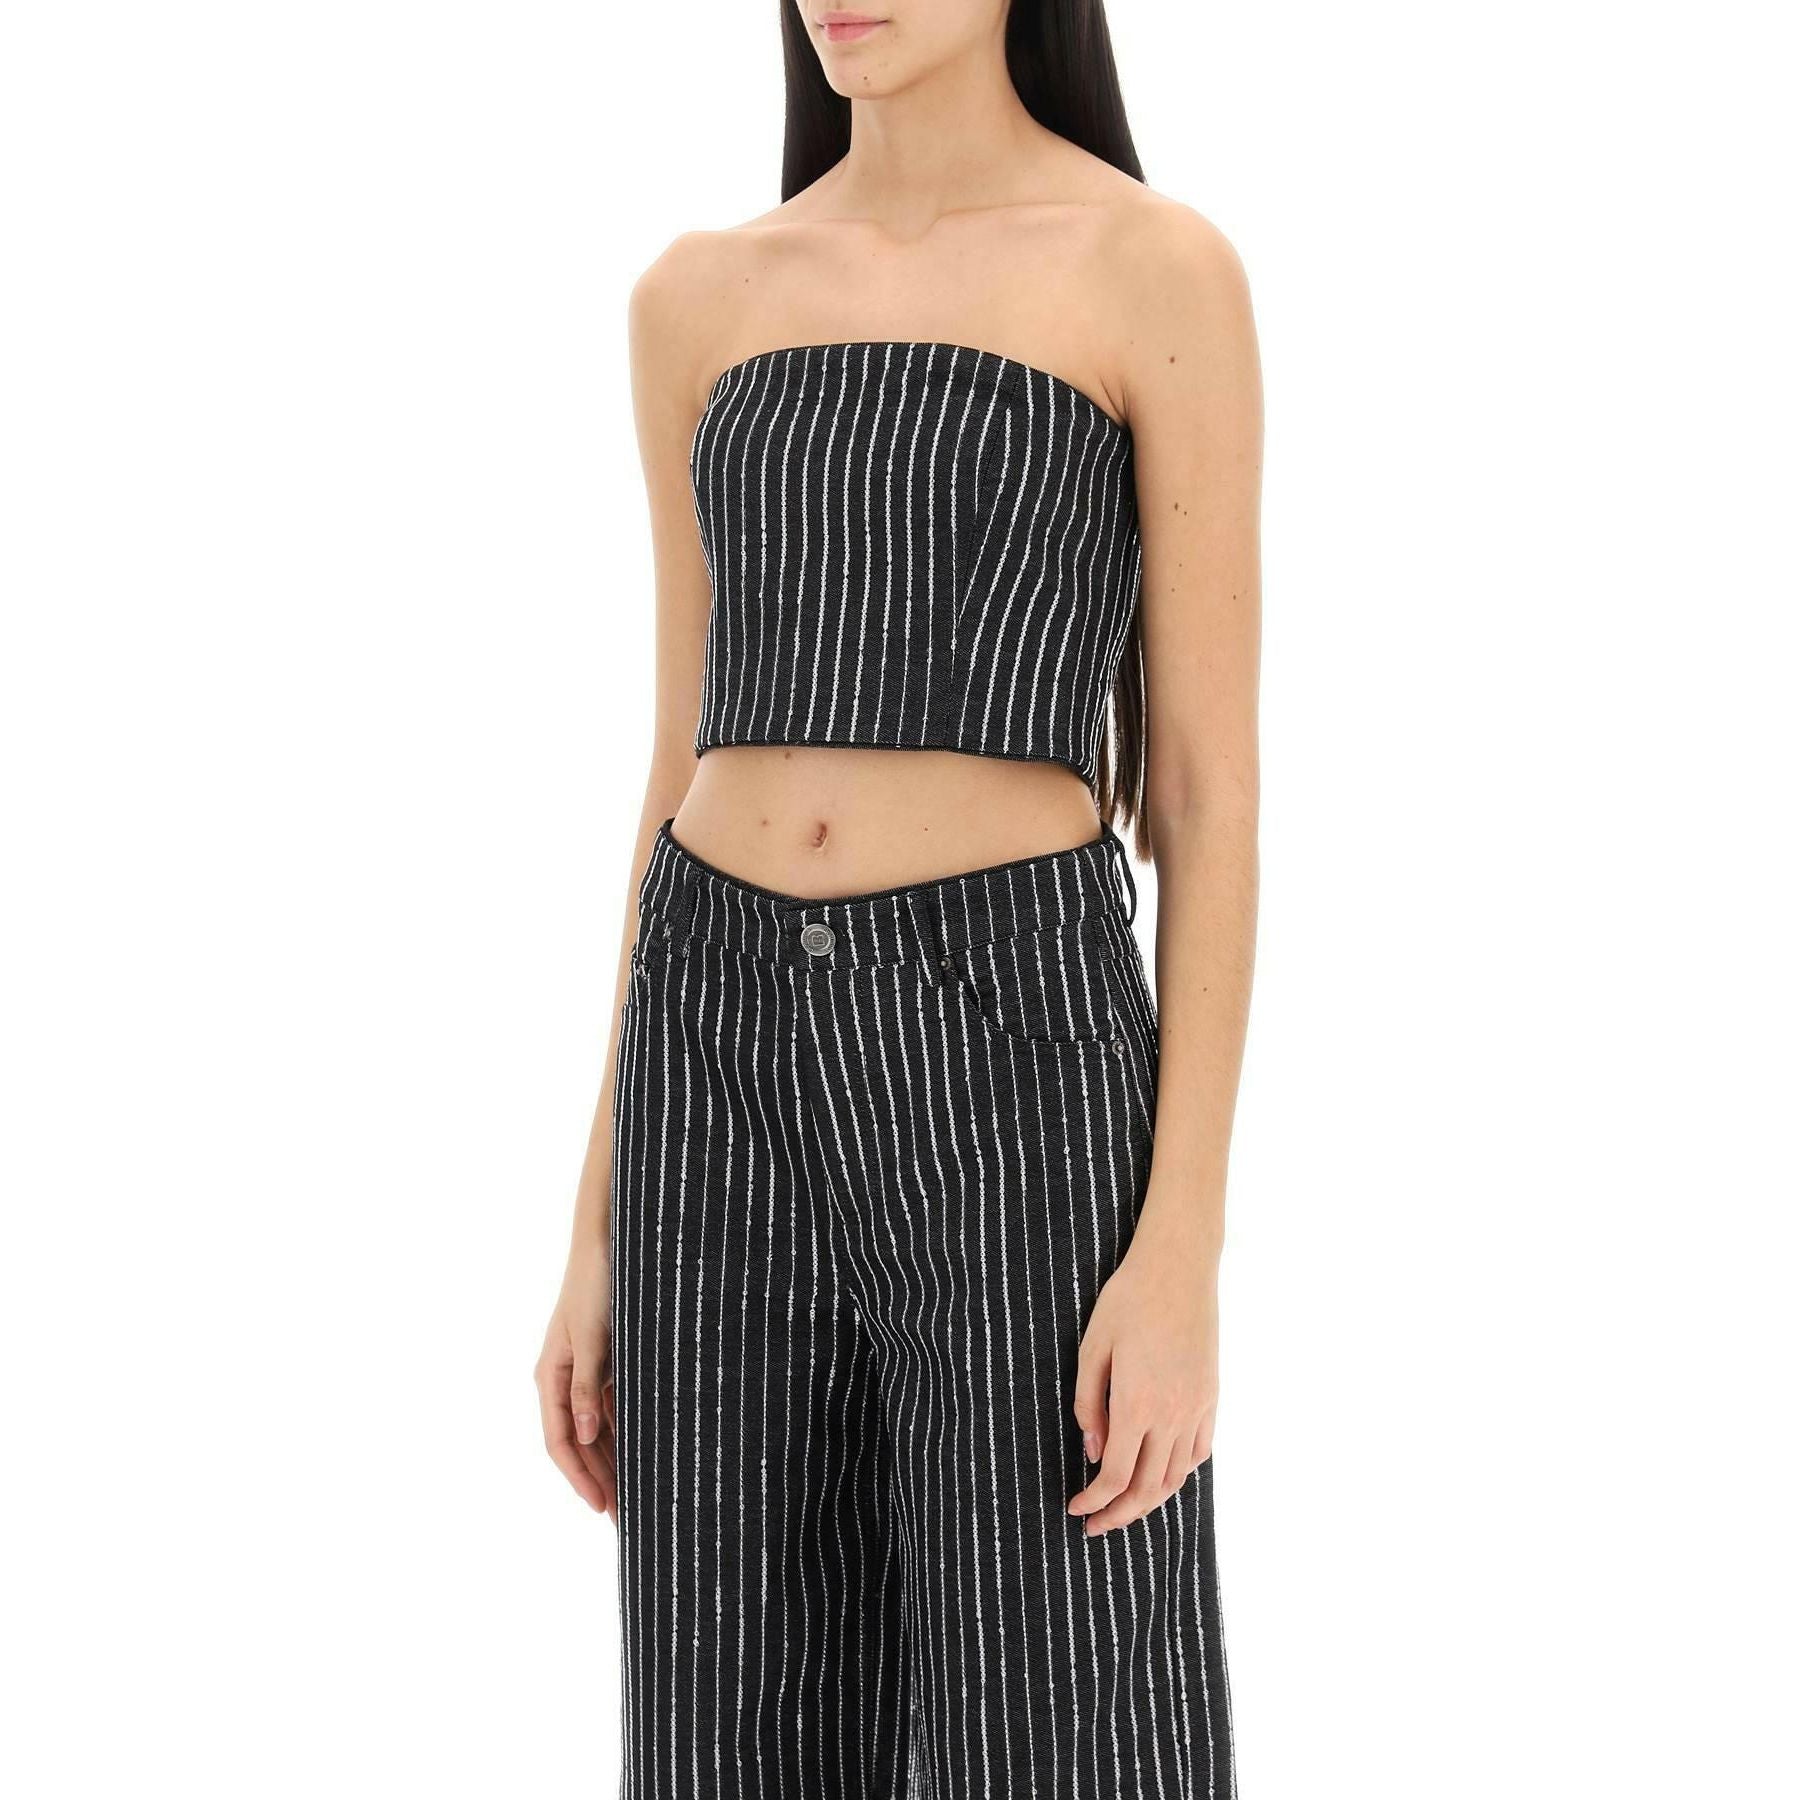 Cropped Top With Sequined Stripes ROTATE JOHN JULIA.